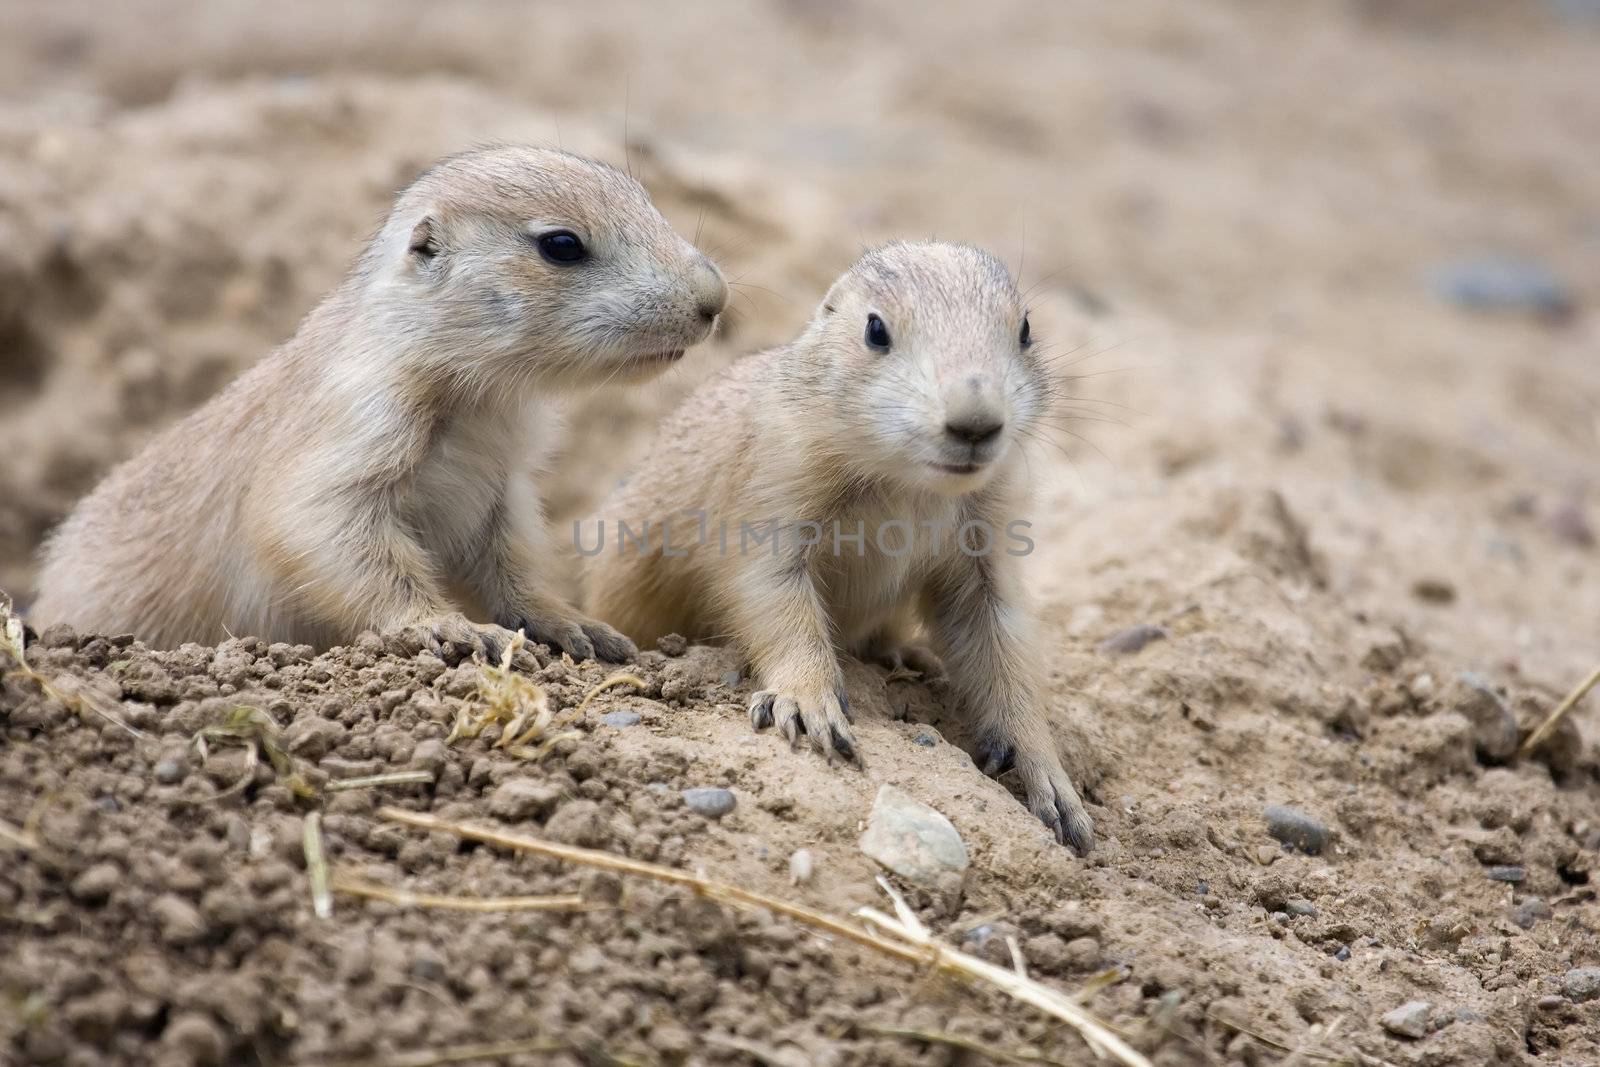 Prairie Dogs by Coffee999